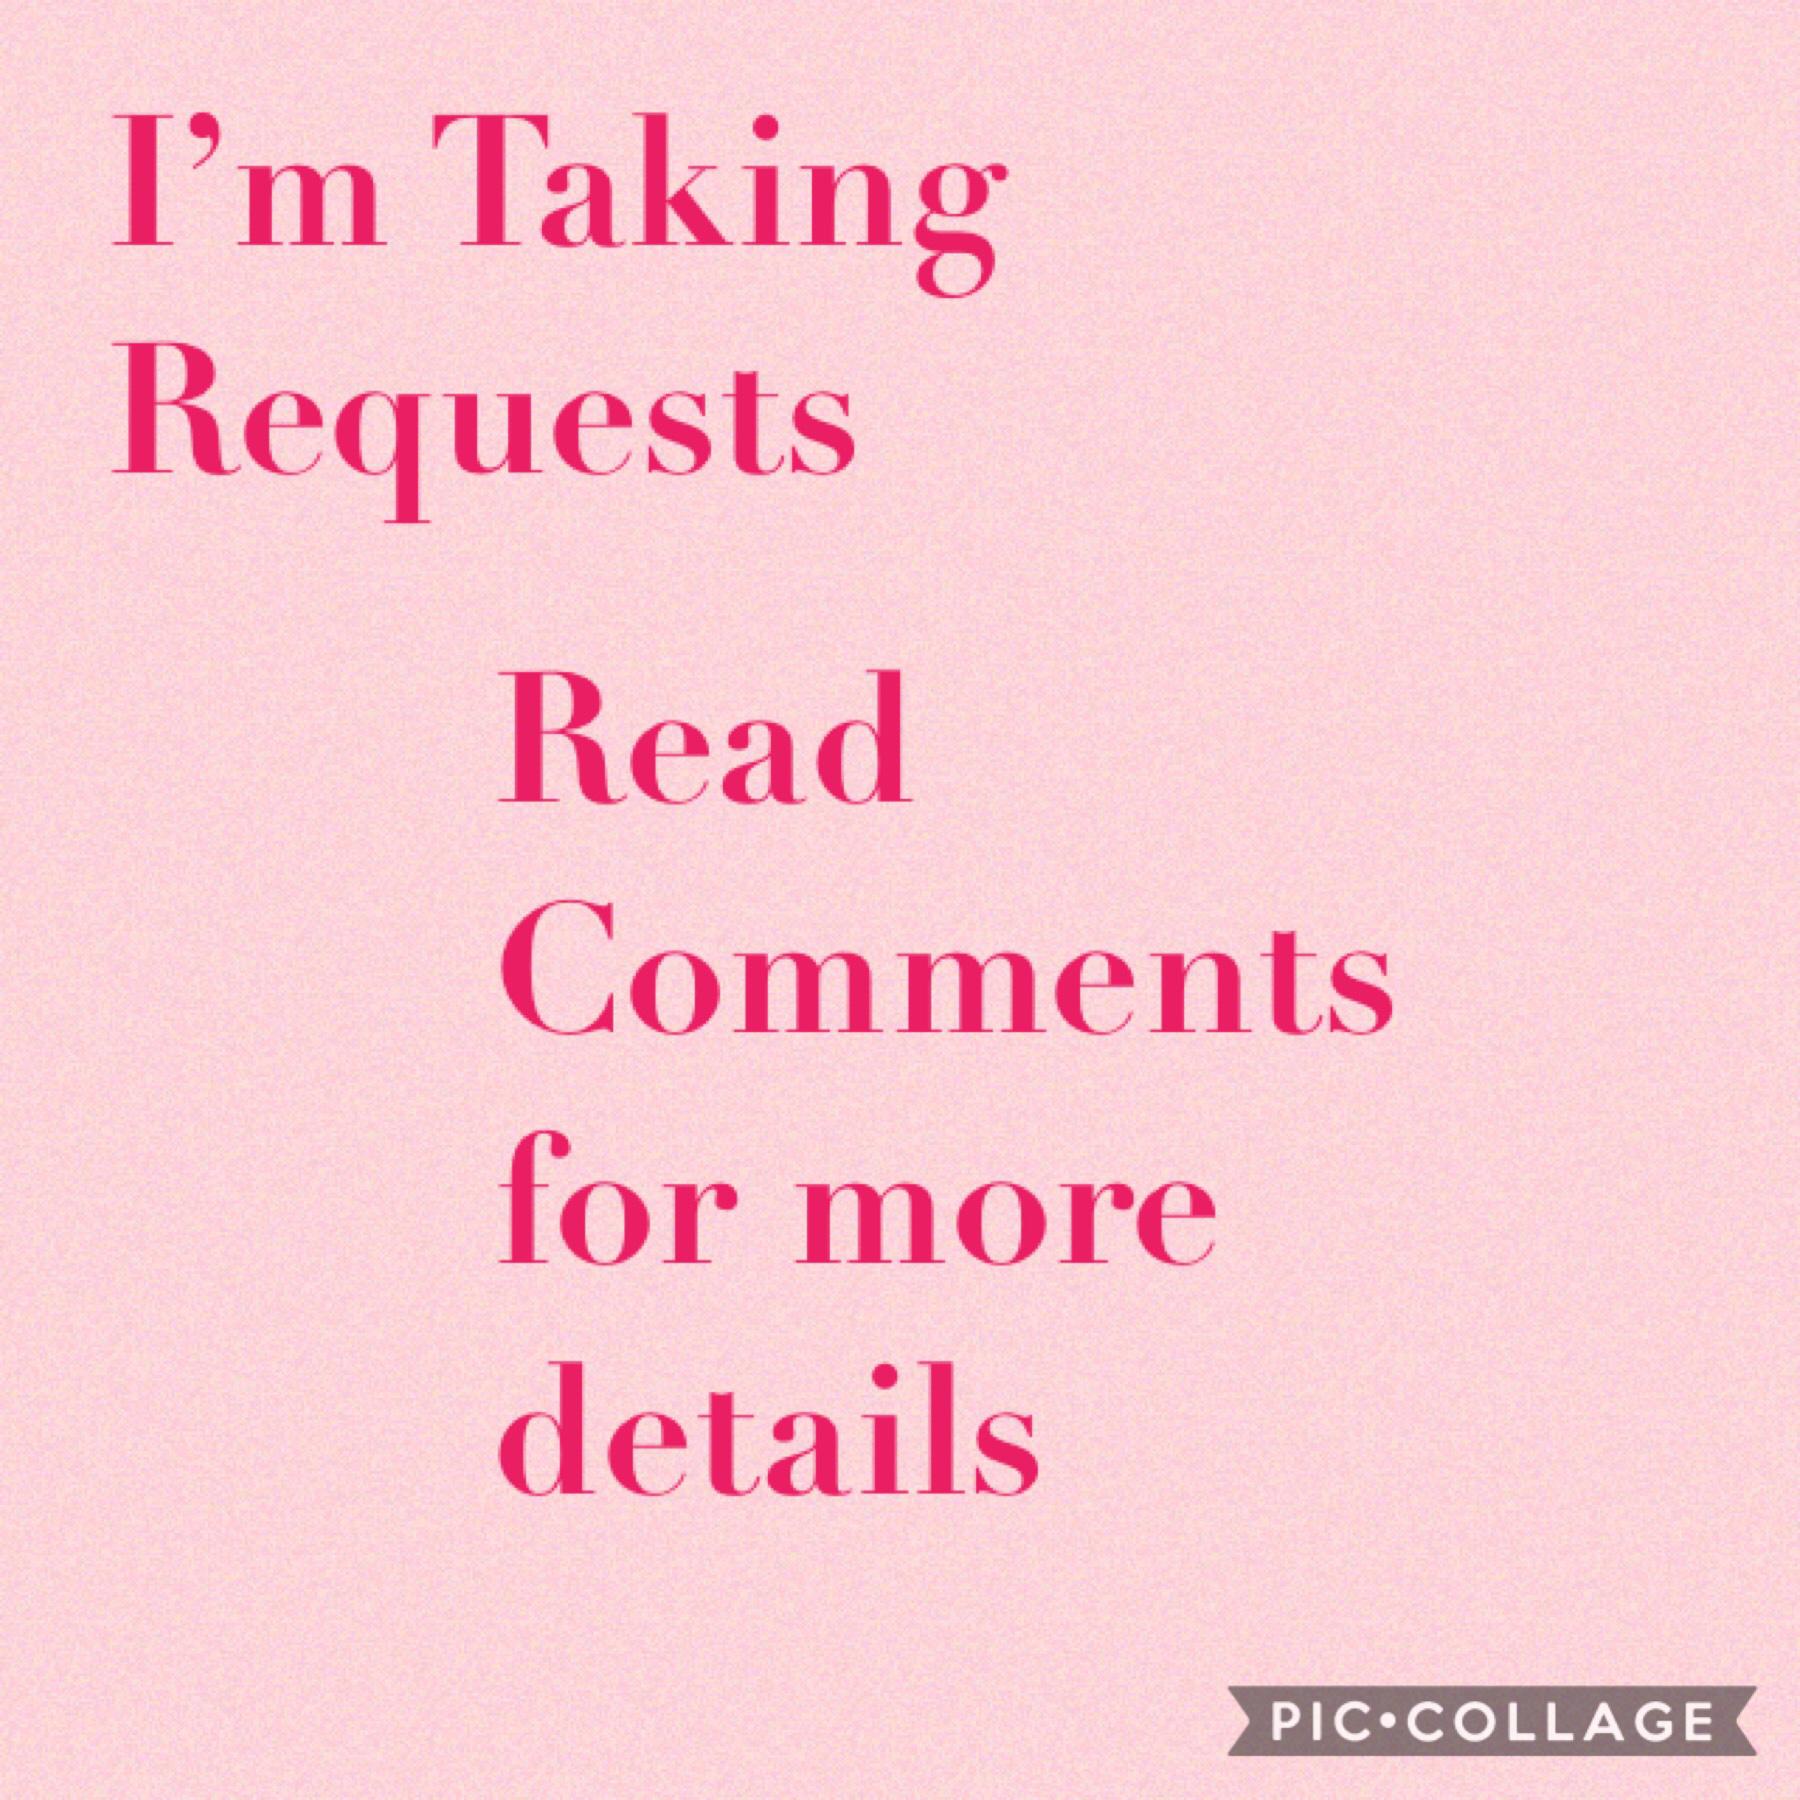 Please feel free to request